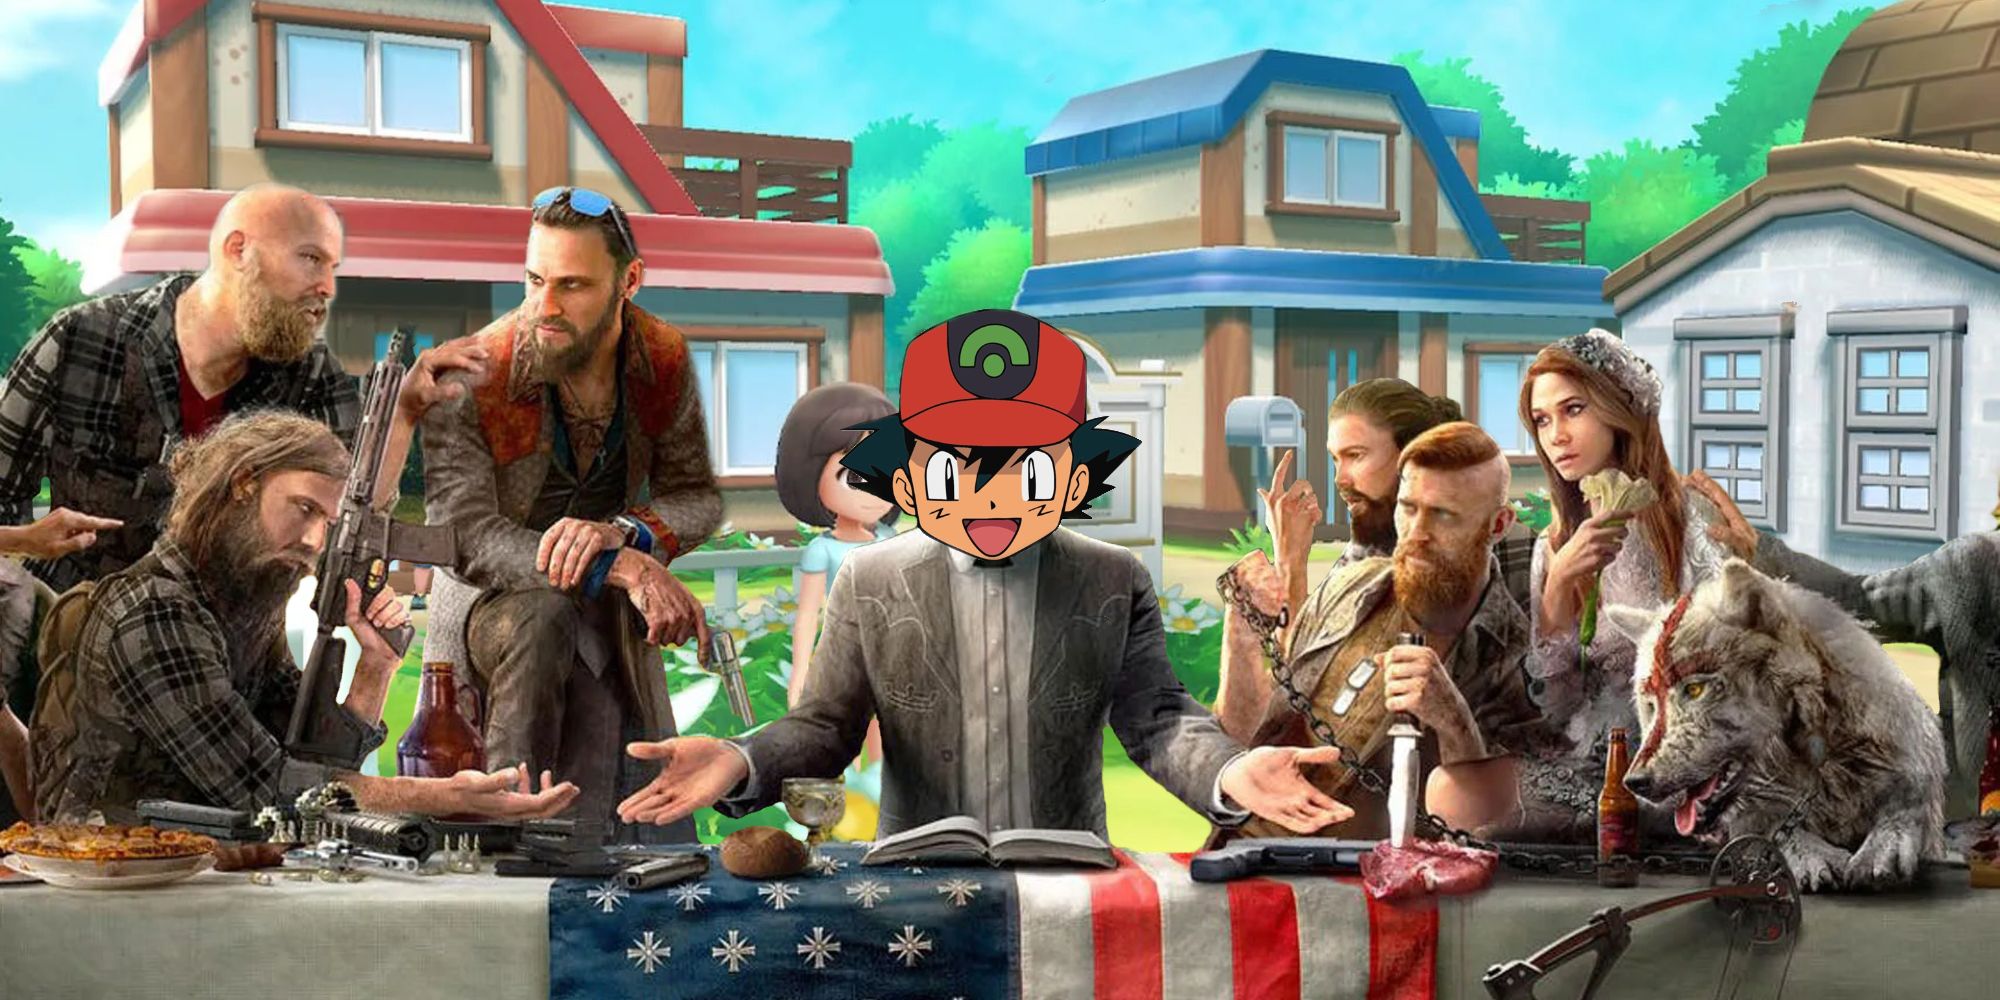 Ash Ketchum with Far Cry 5 villains in Pallet Town